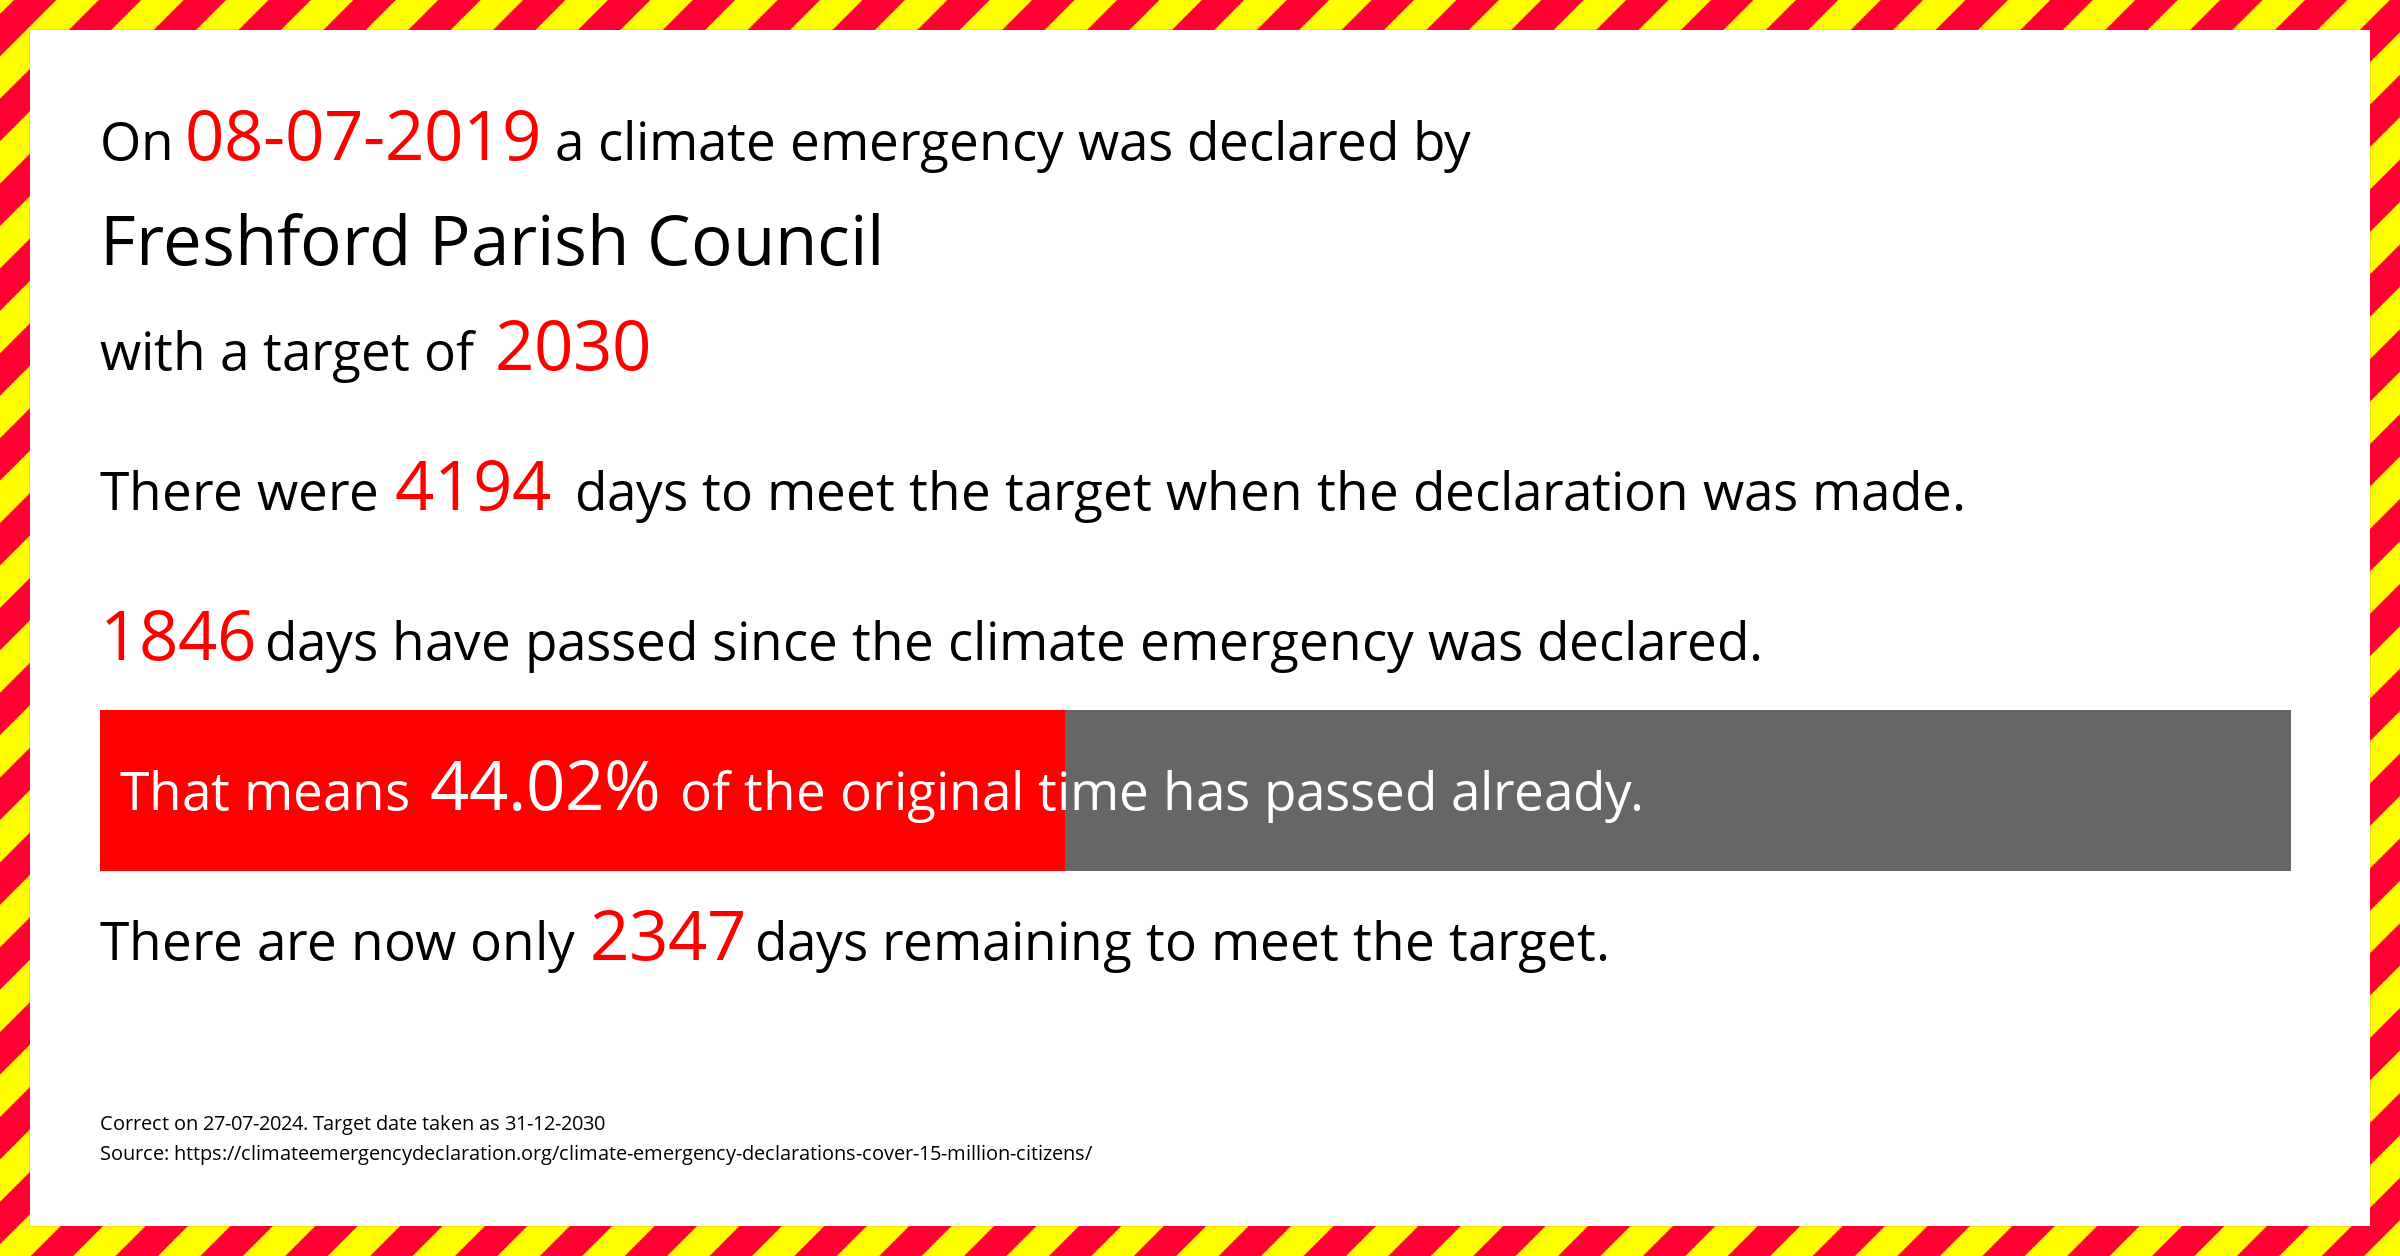 Freshford Parish Council declared a Climate emergency on Monday 8th July 2019, with a target of 2030.